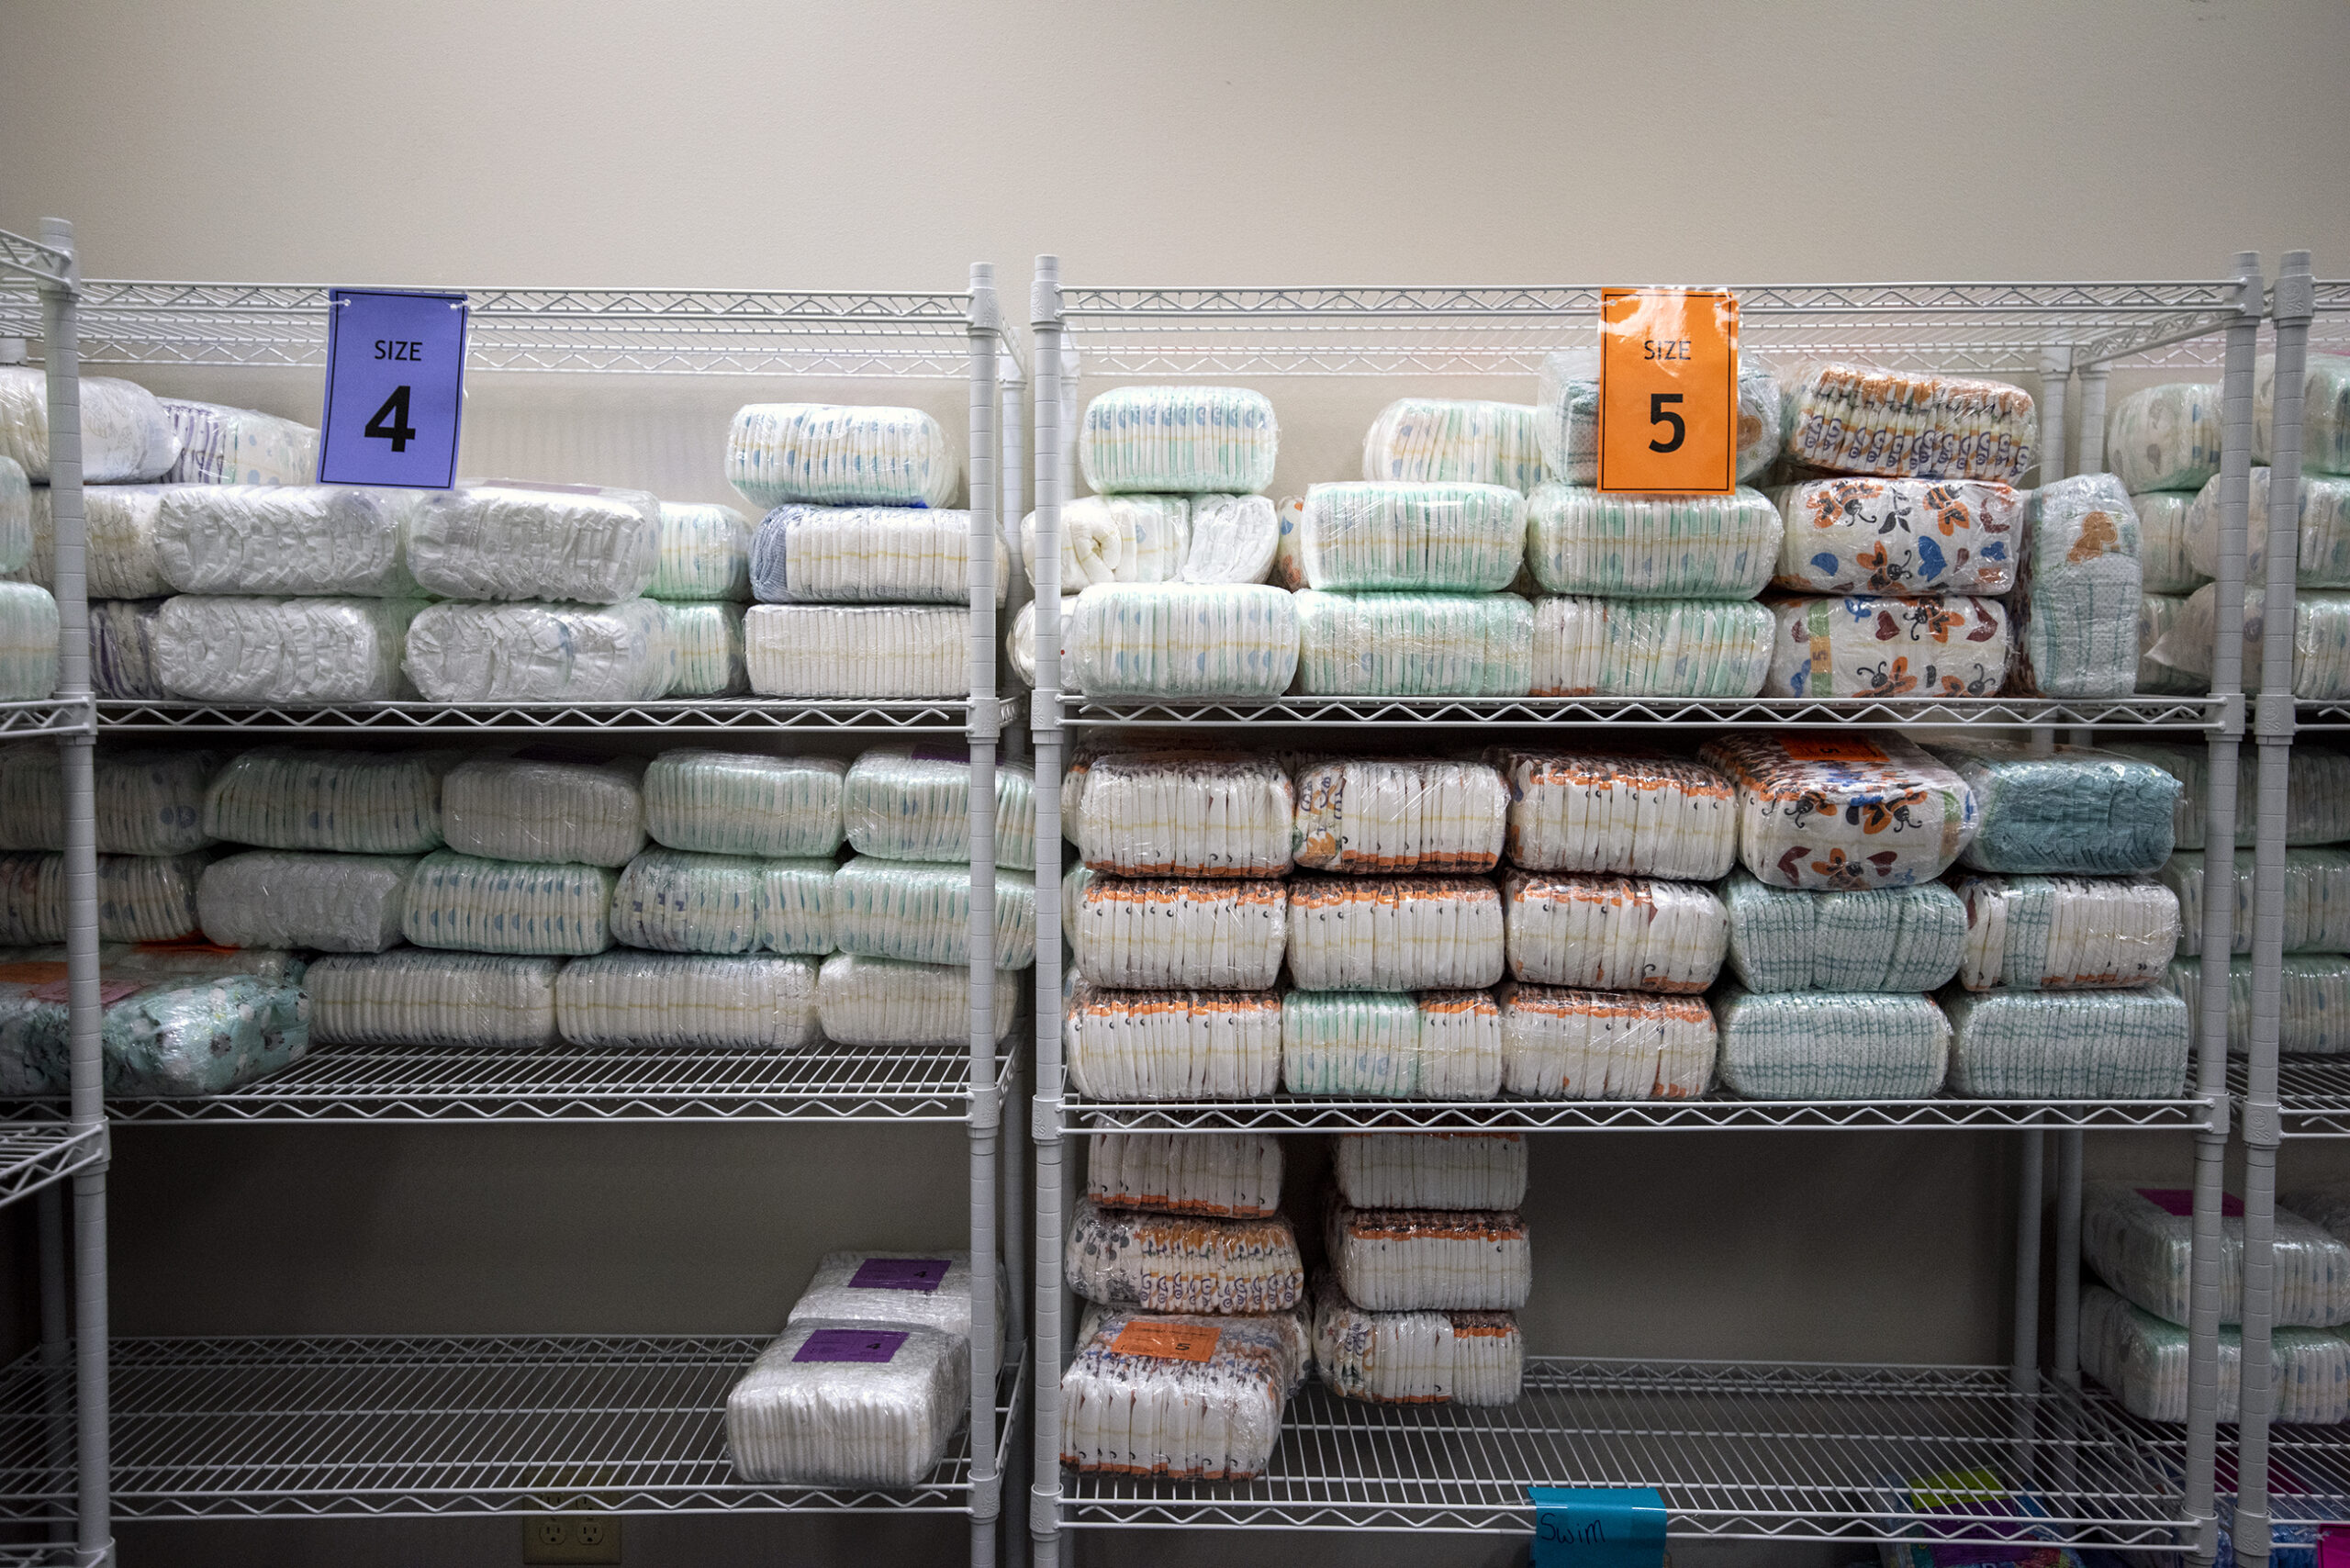 Packaged diapers are on a shelf.